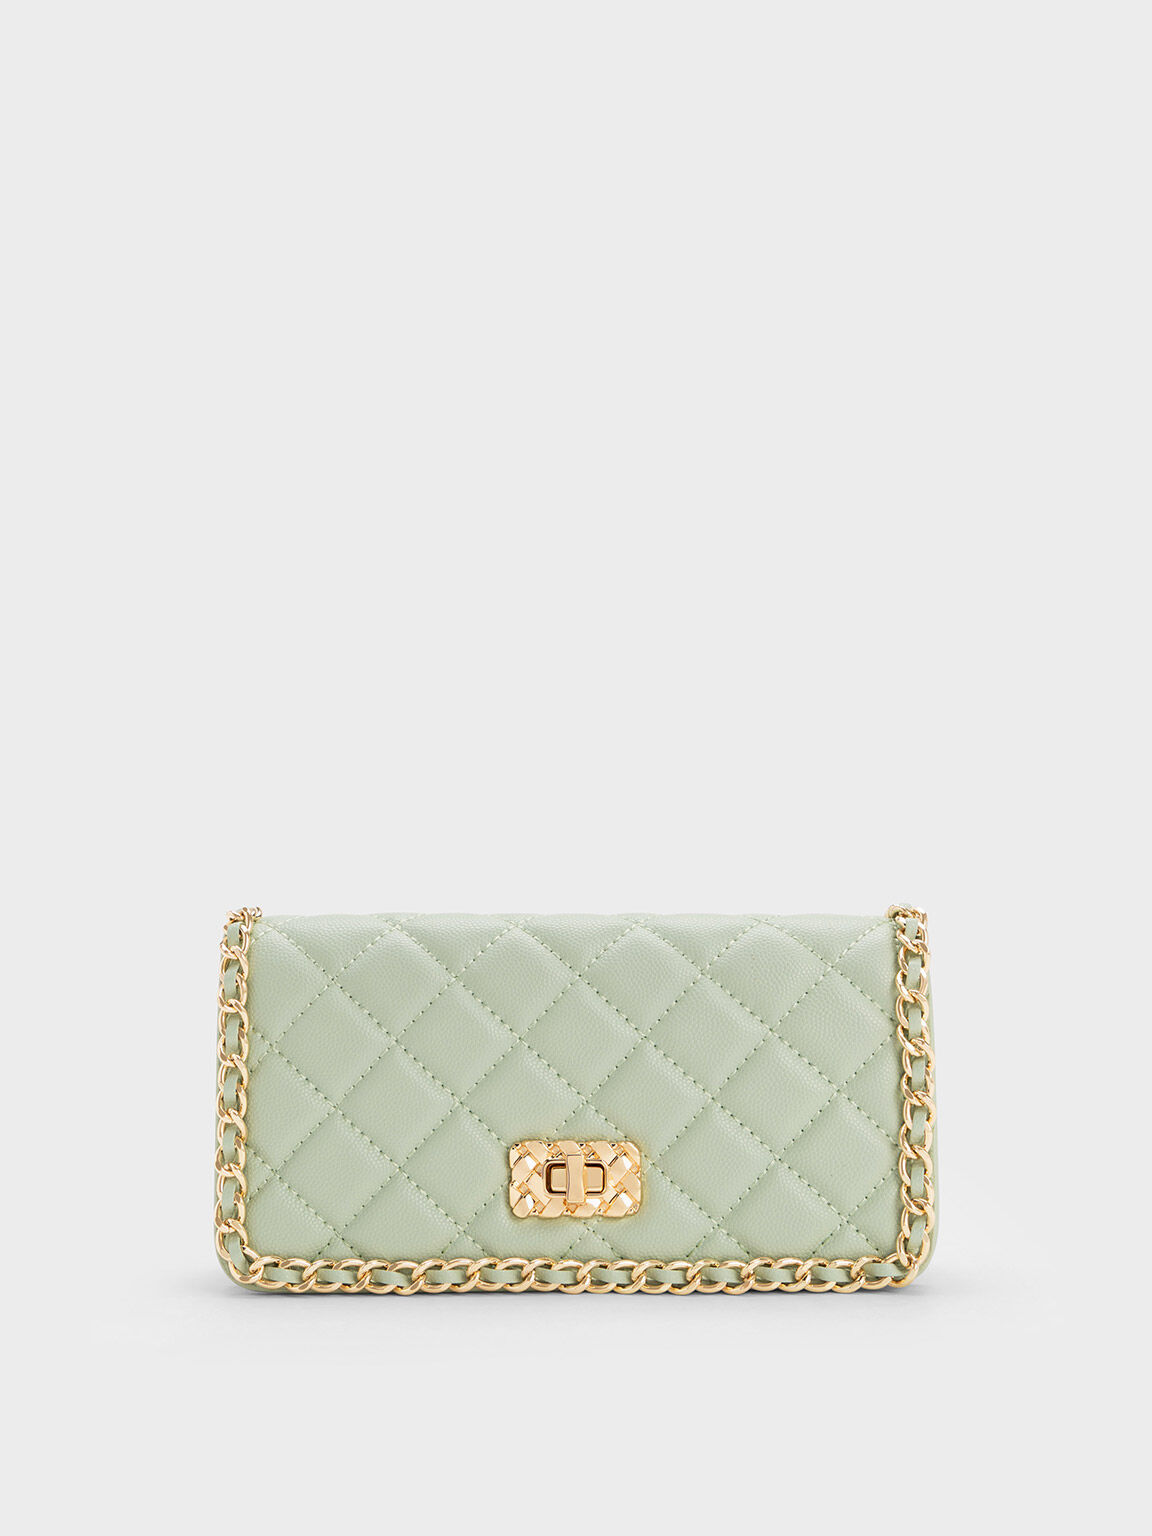 Mint Green Quilted Card Holder - CHARLES & KEITH IN